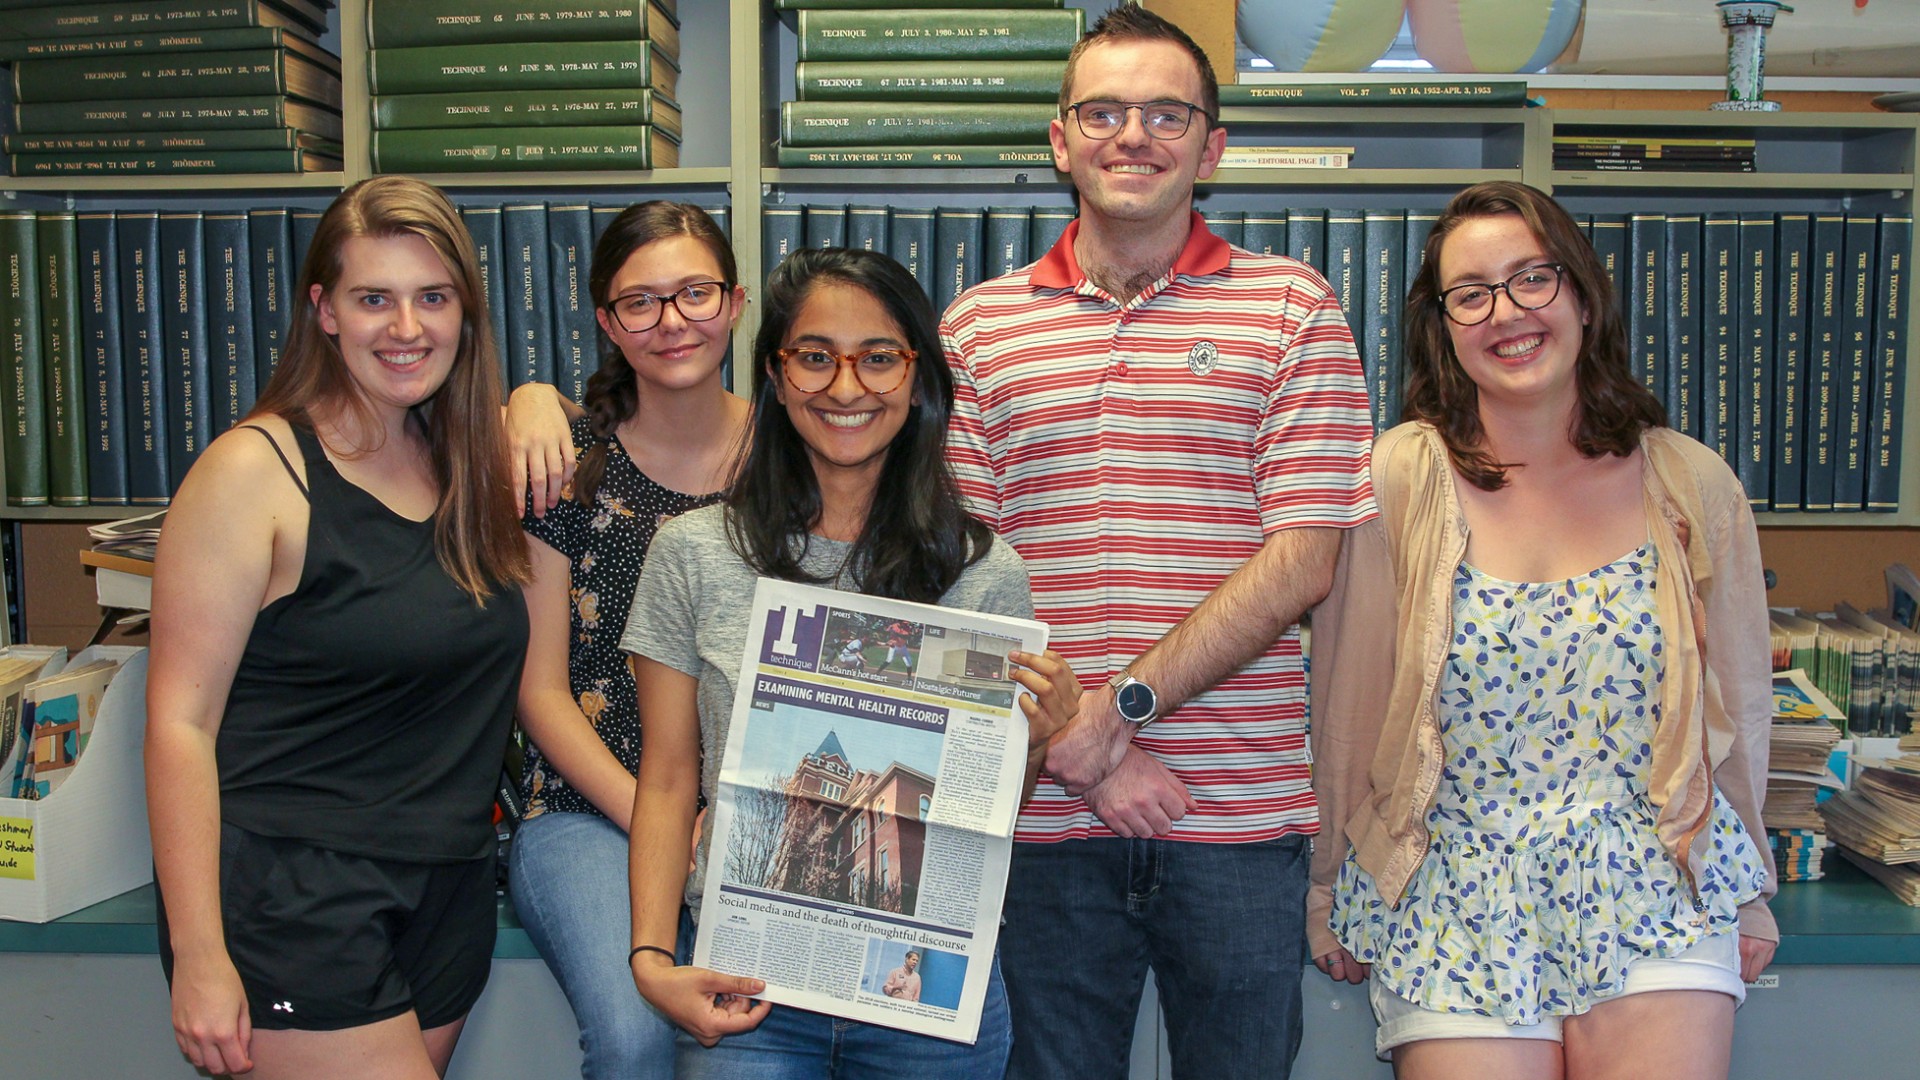 Lauren Douglas, Rosemary Pitrone, Samira Bandaru, Jon Long, and Maura Currie with the Technique's penultimate issue of the academic year.